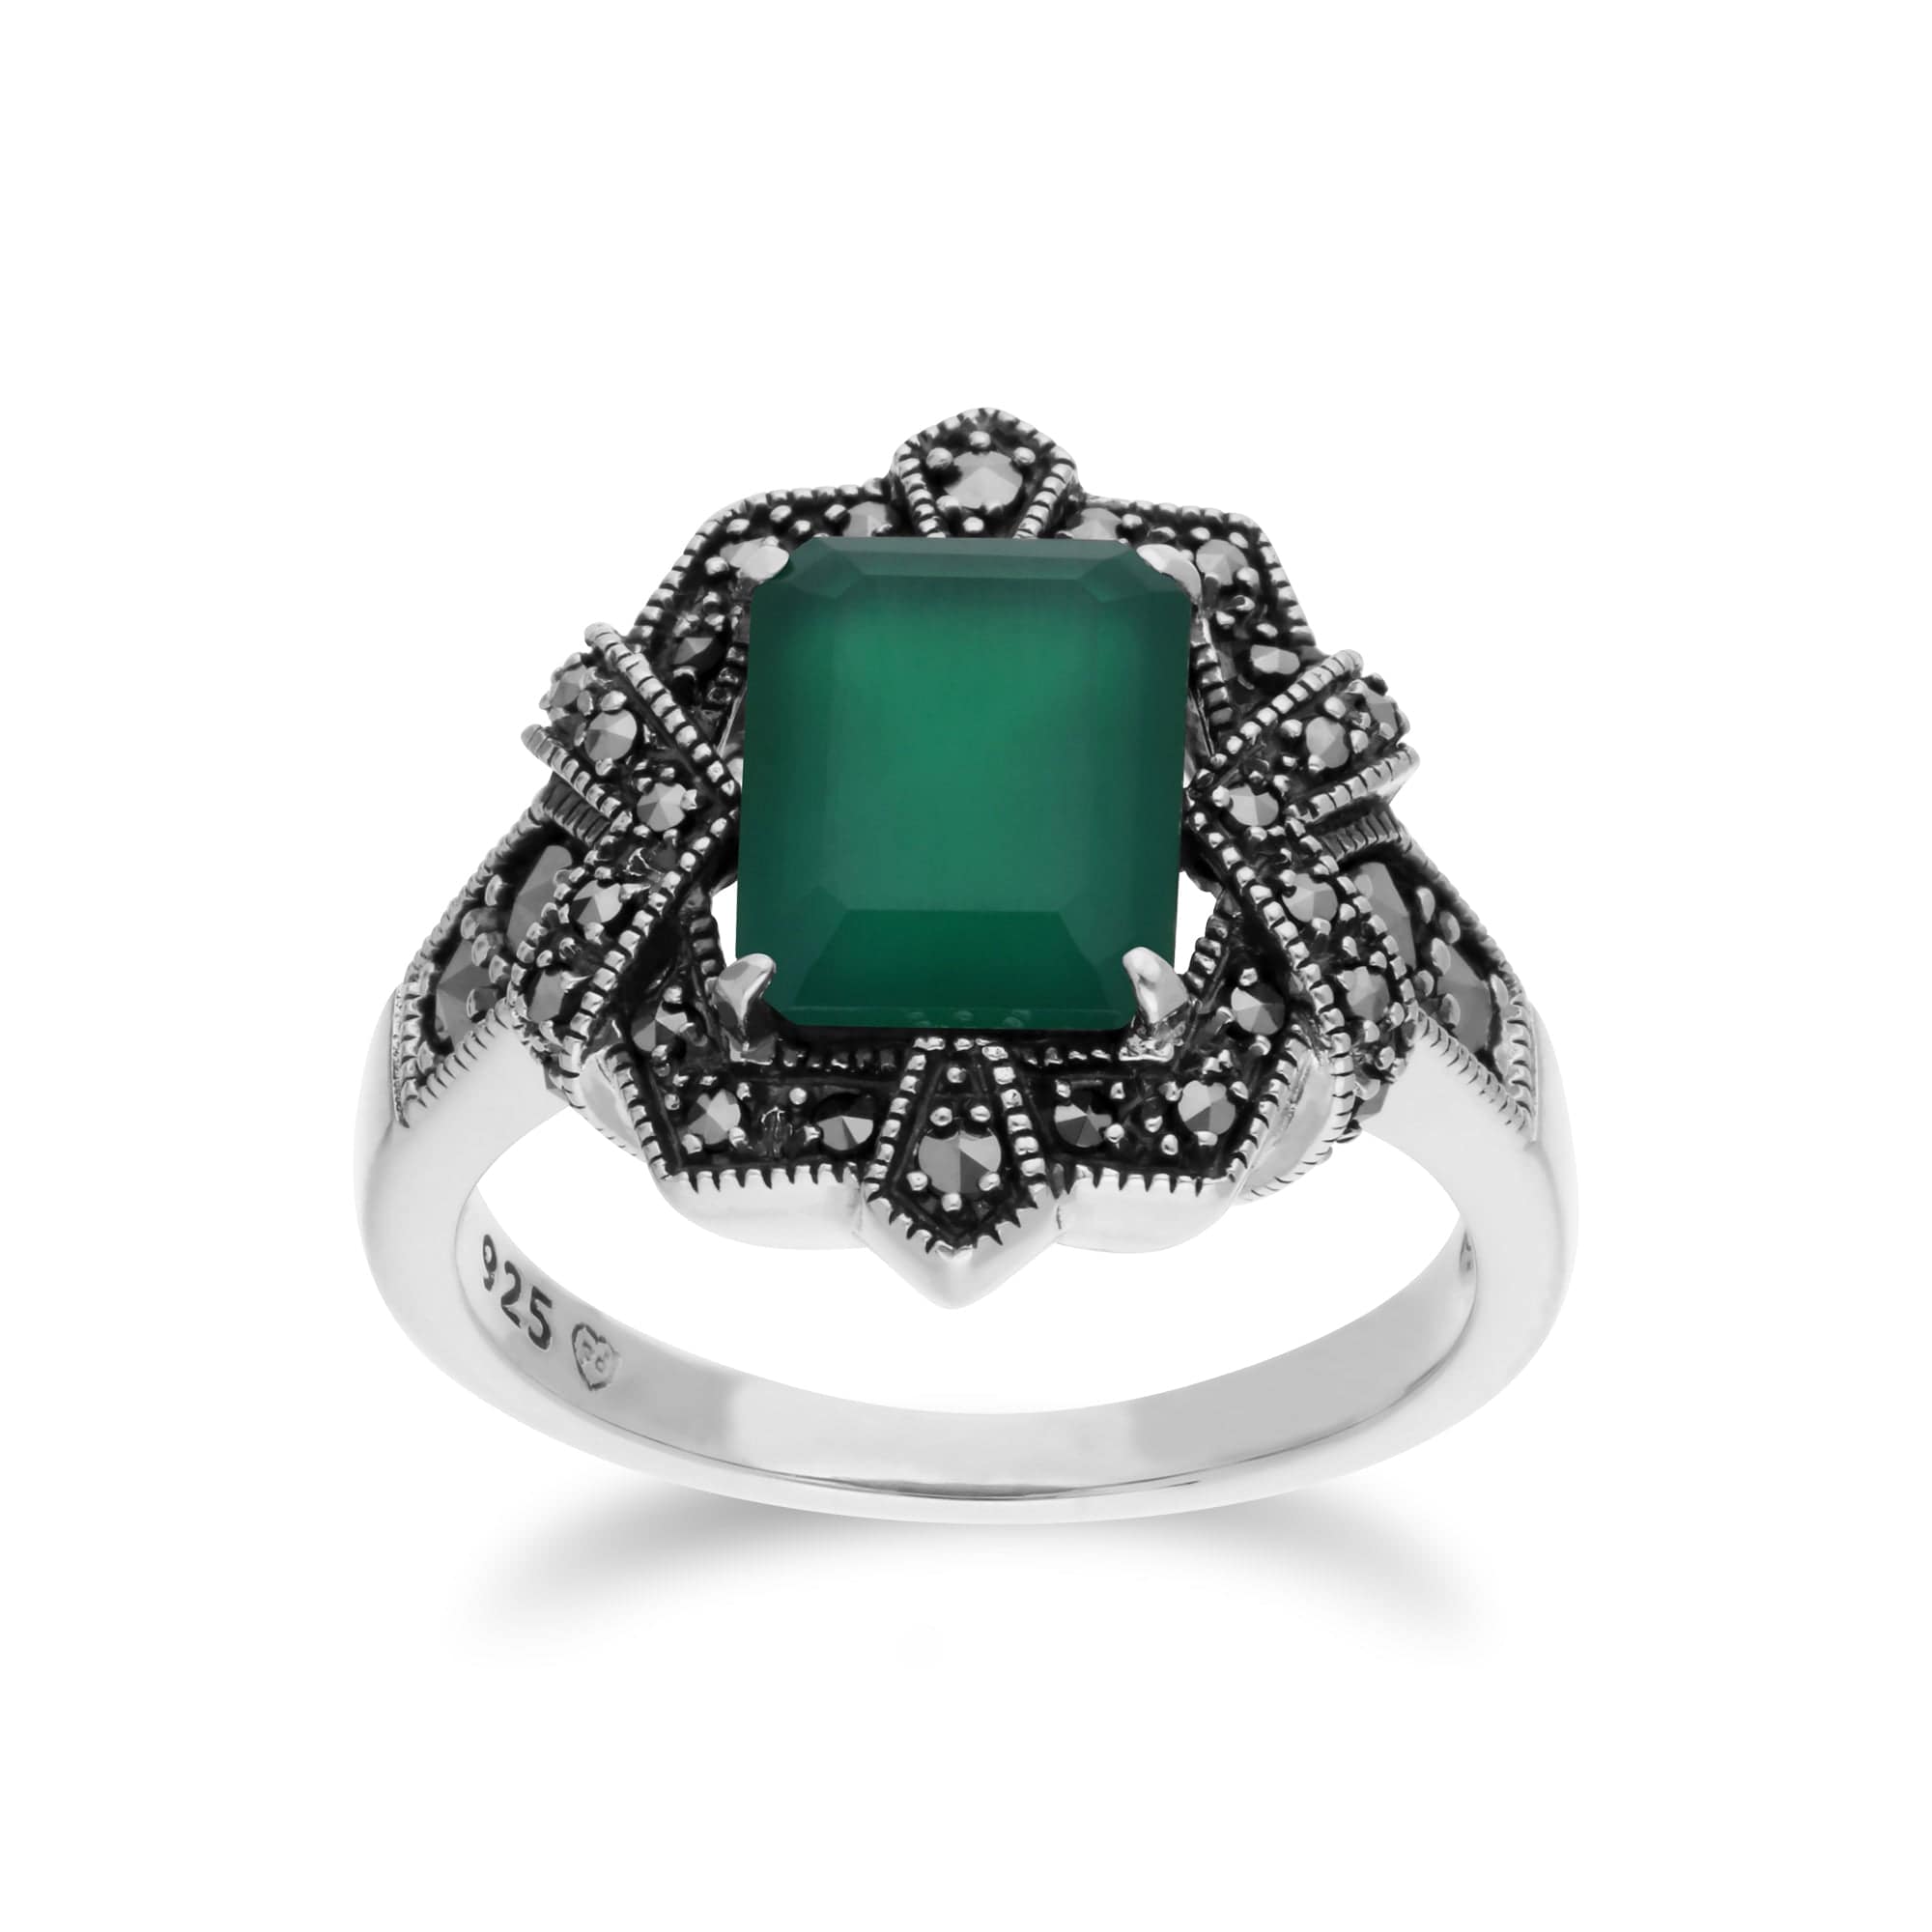 214R570809925 Art Deco Style Baguette Green Chalcedony & Marcasite Ring in 925 Sterling Silver 1